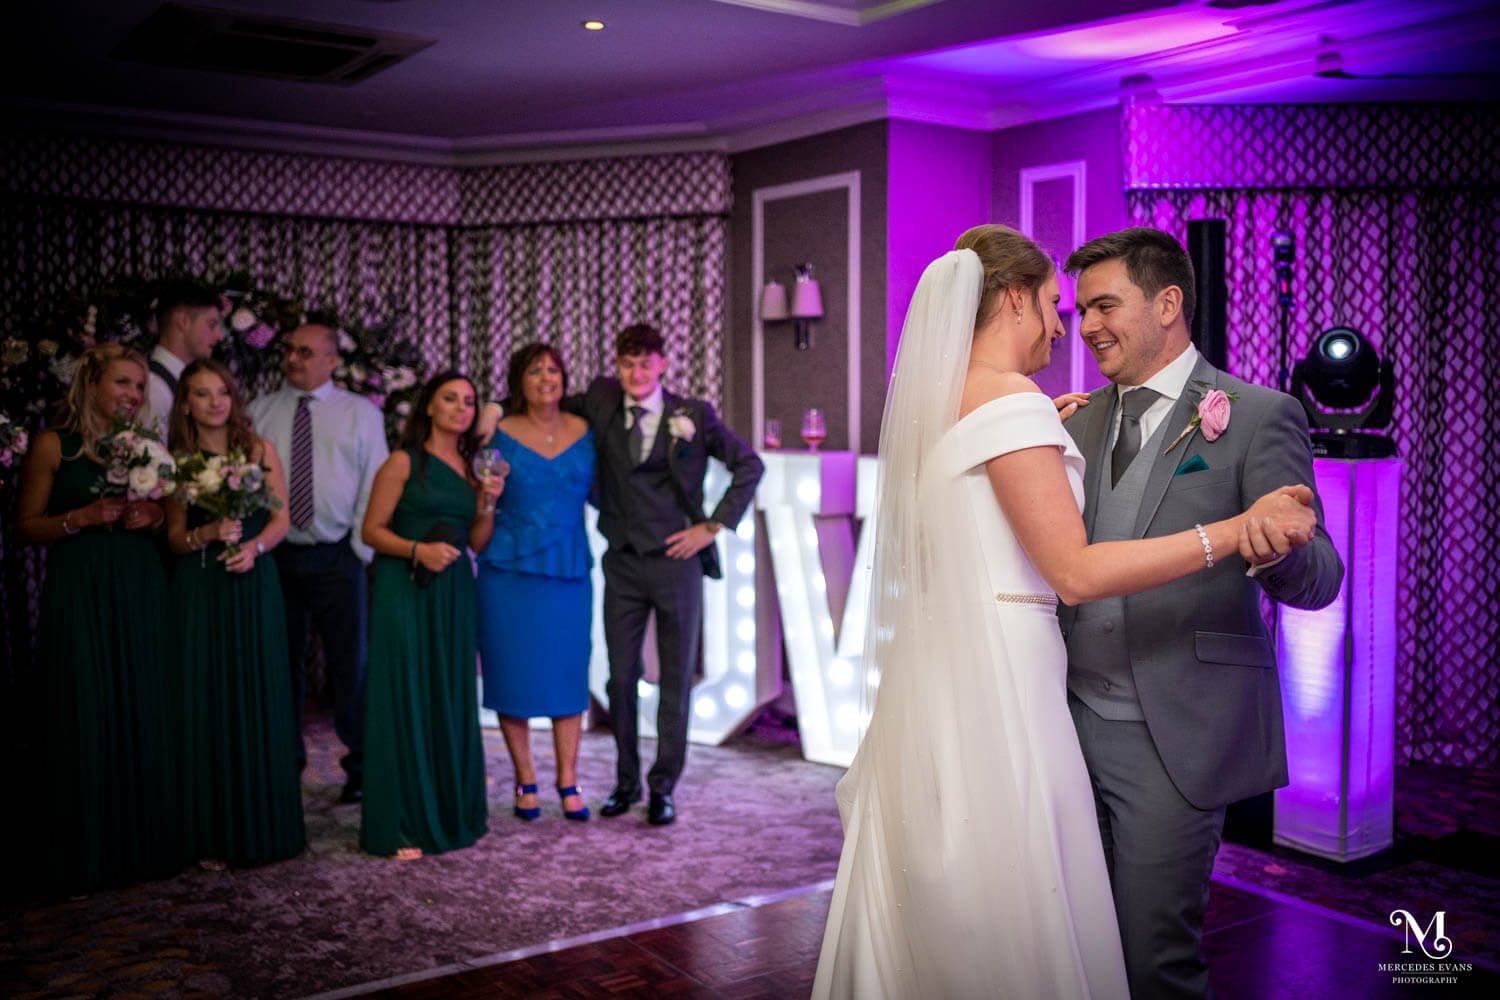 the bride and groom enjoy their first dance together as friends and family watch